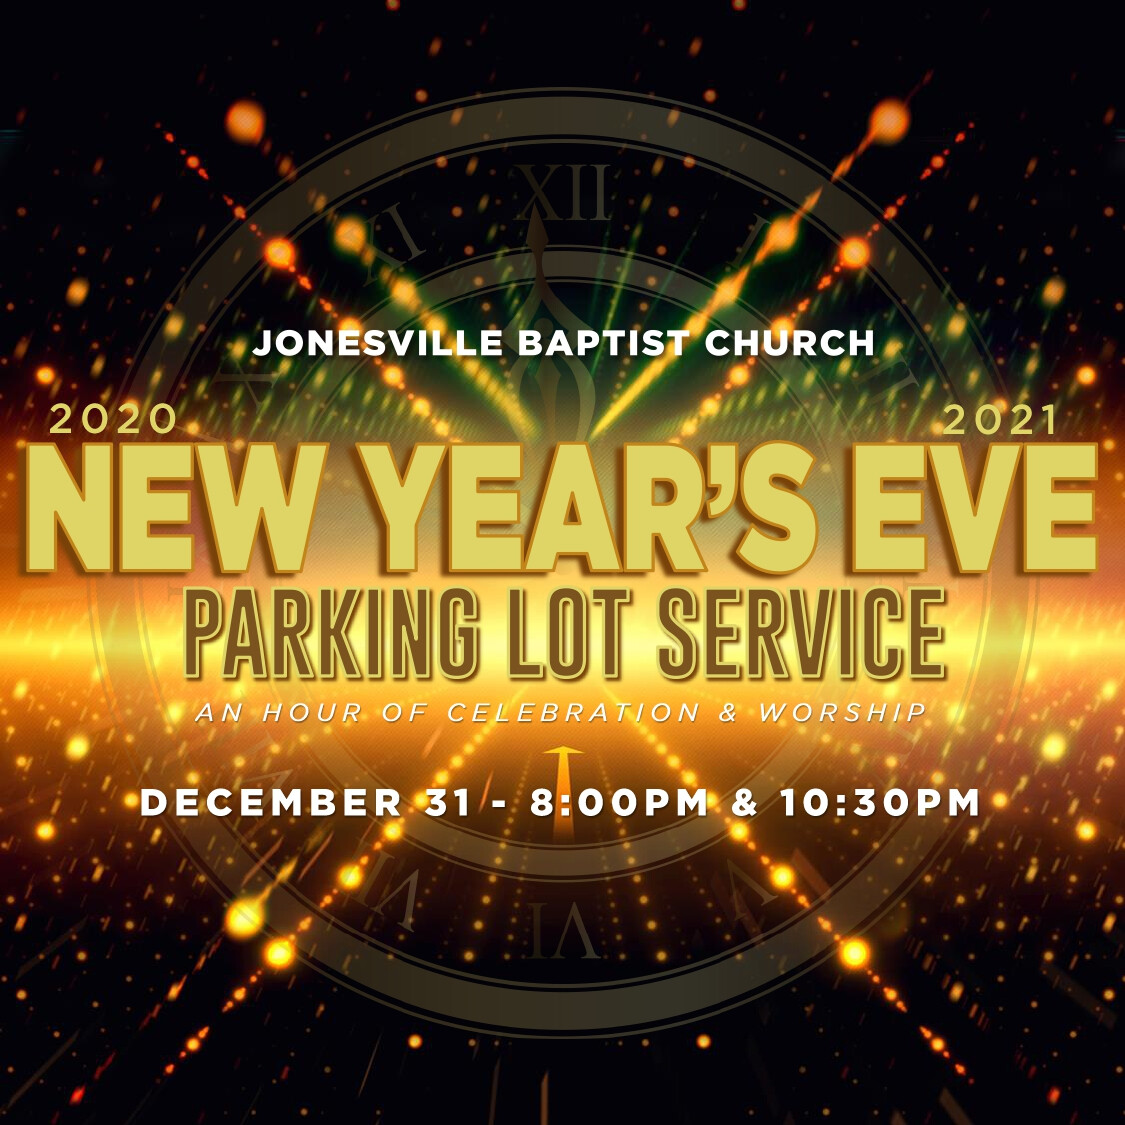 New Year's Eve Parking Lot Service